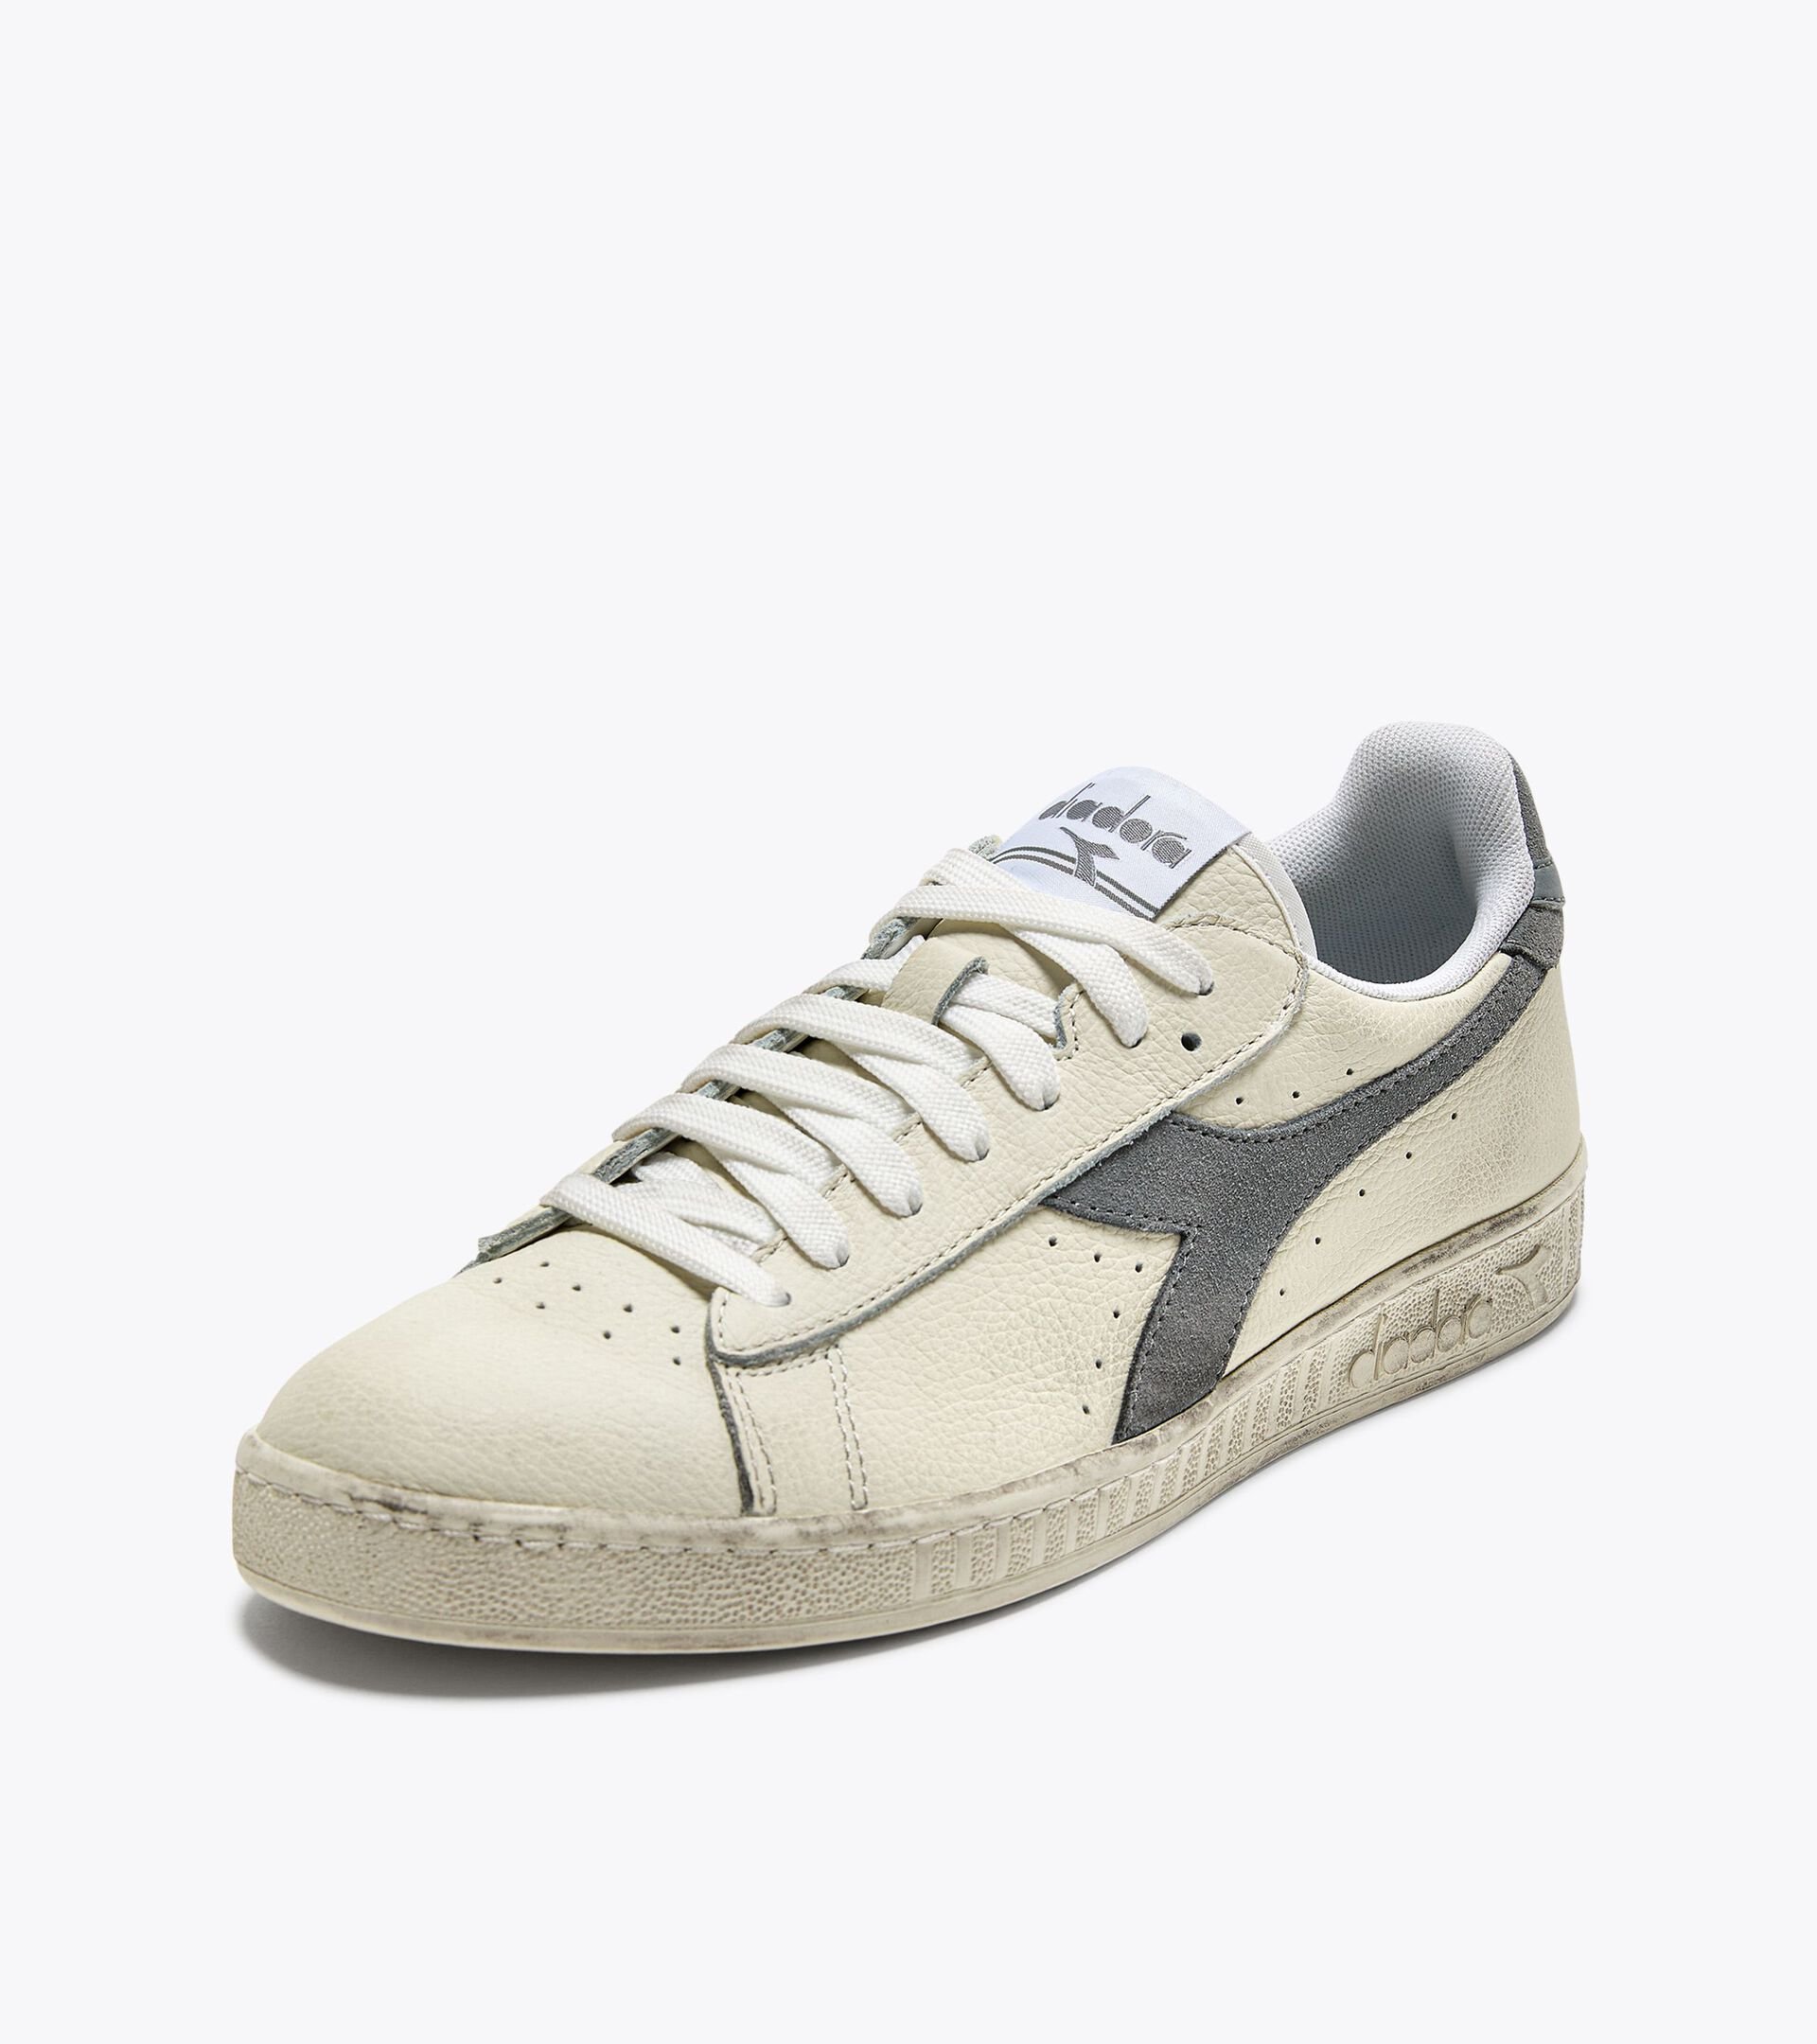 GAME L LOW WAXED SUEDE POP Sporty sneakers - Gender neutral - Diadora ...